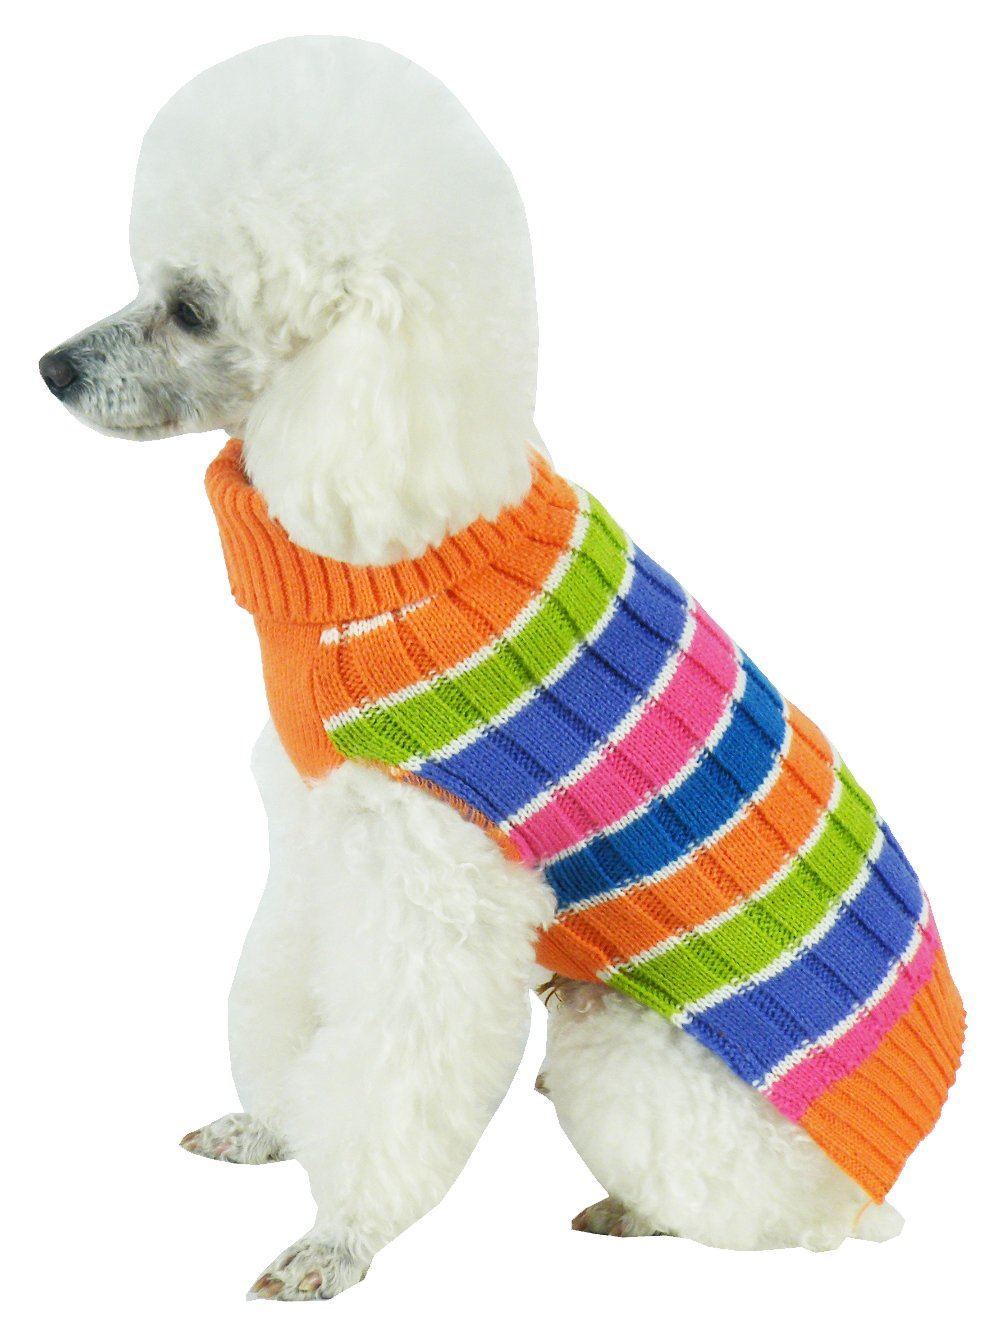 Pet Life ® Oval Weaved Fashion Pet Sweater - Designer Heavy Cable Knitted  Dog Sweater with Turtle Neck - Winter Dog Clothes Designed to Keep Warm